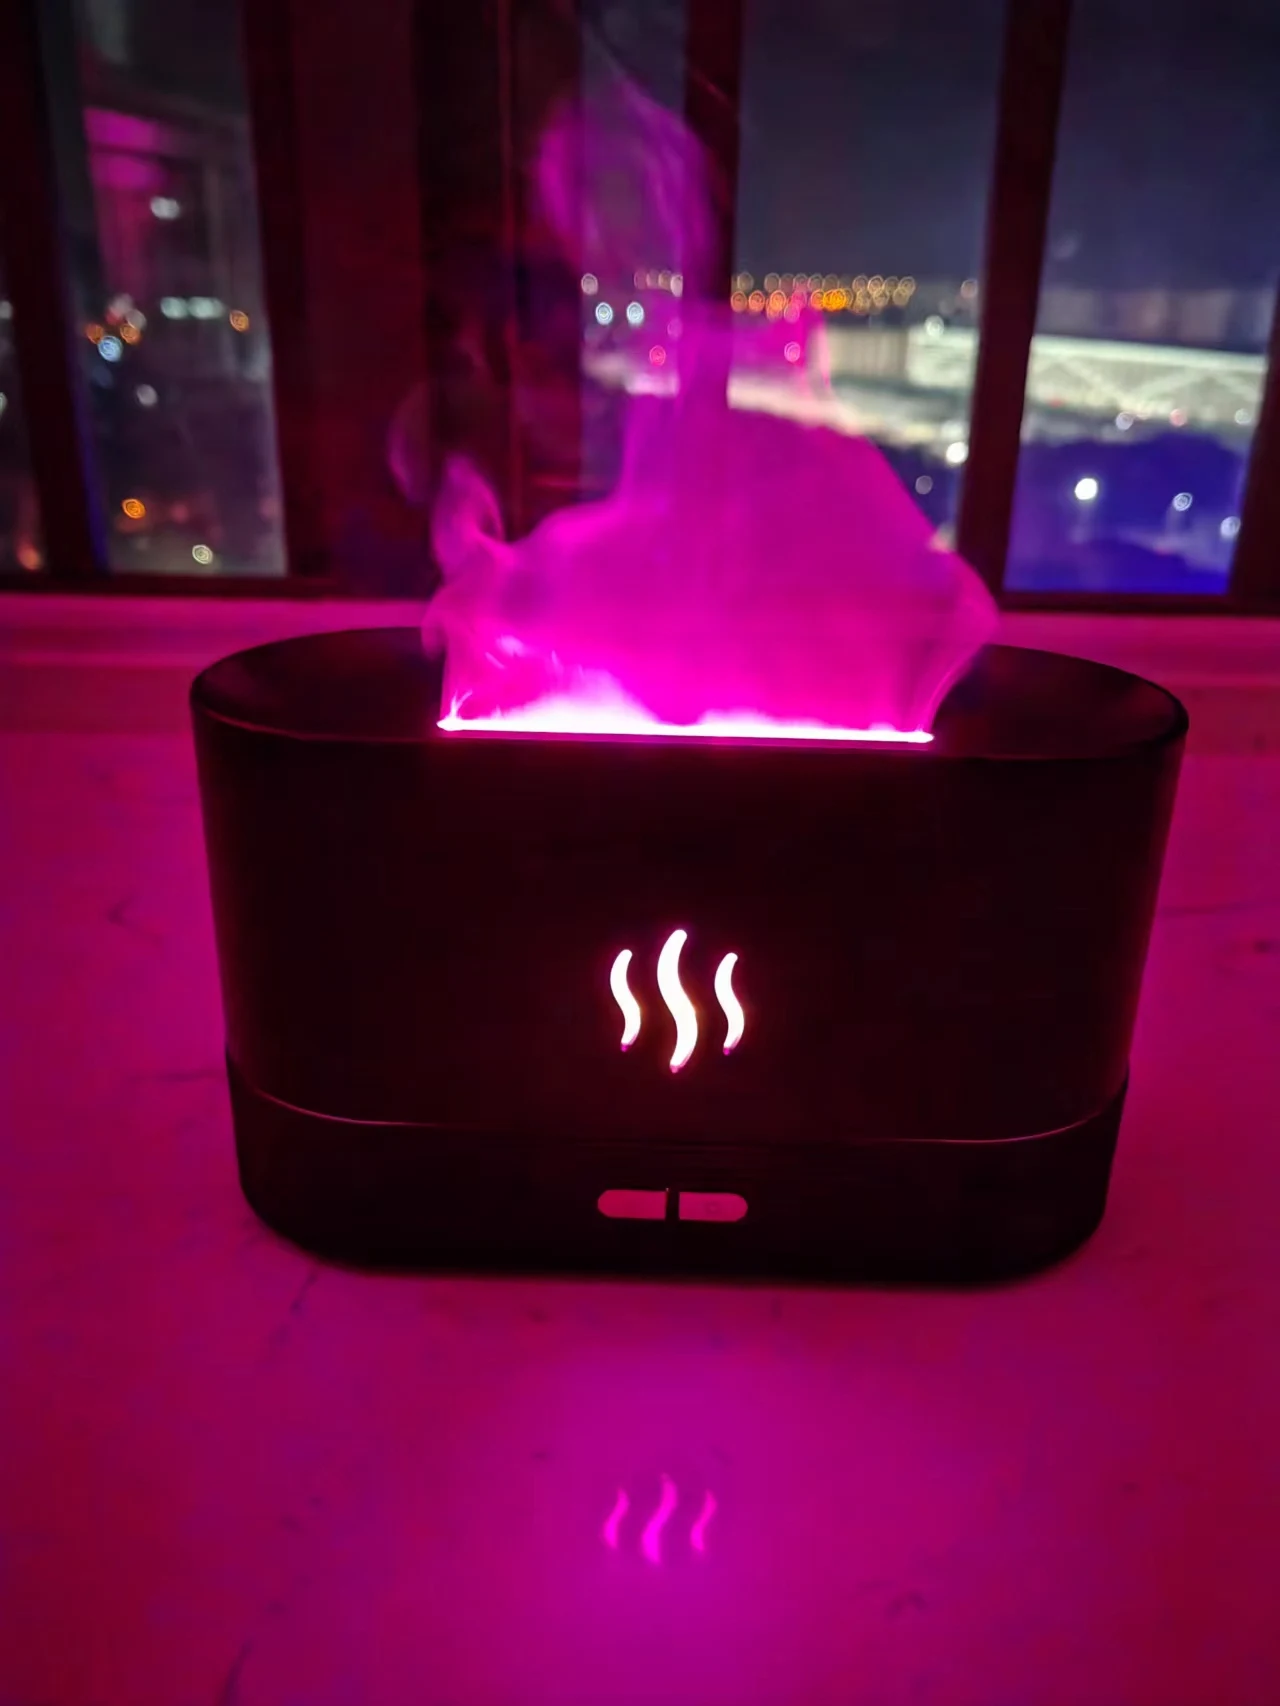 Flame Aroma Diffuser Air Humidifier photo review